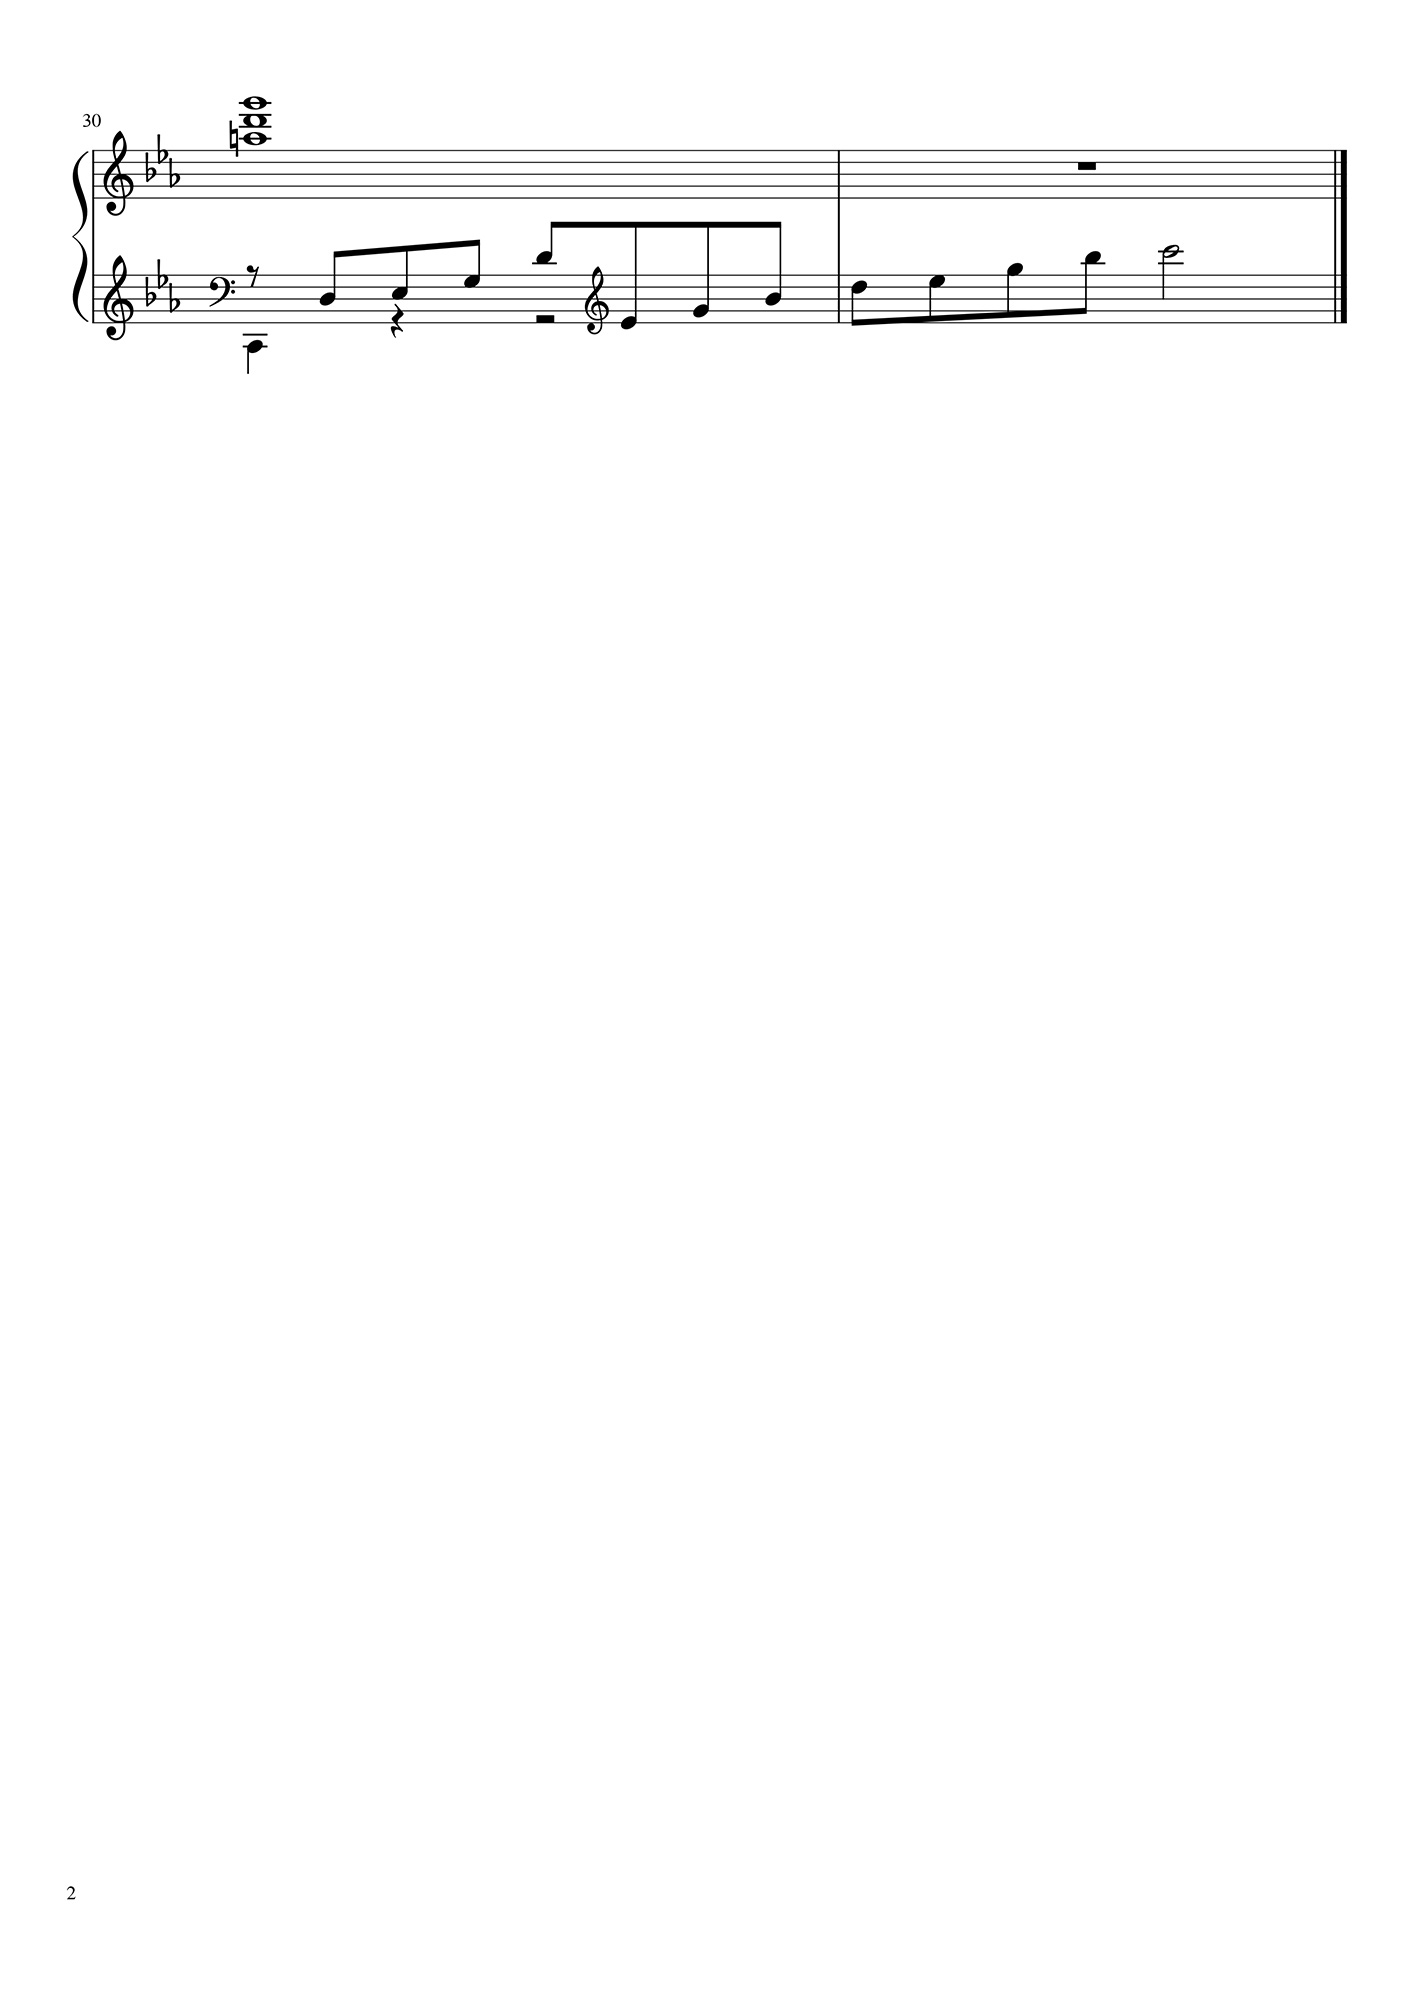 An image of musical notes and score for an instrumental improvisation.